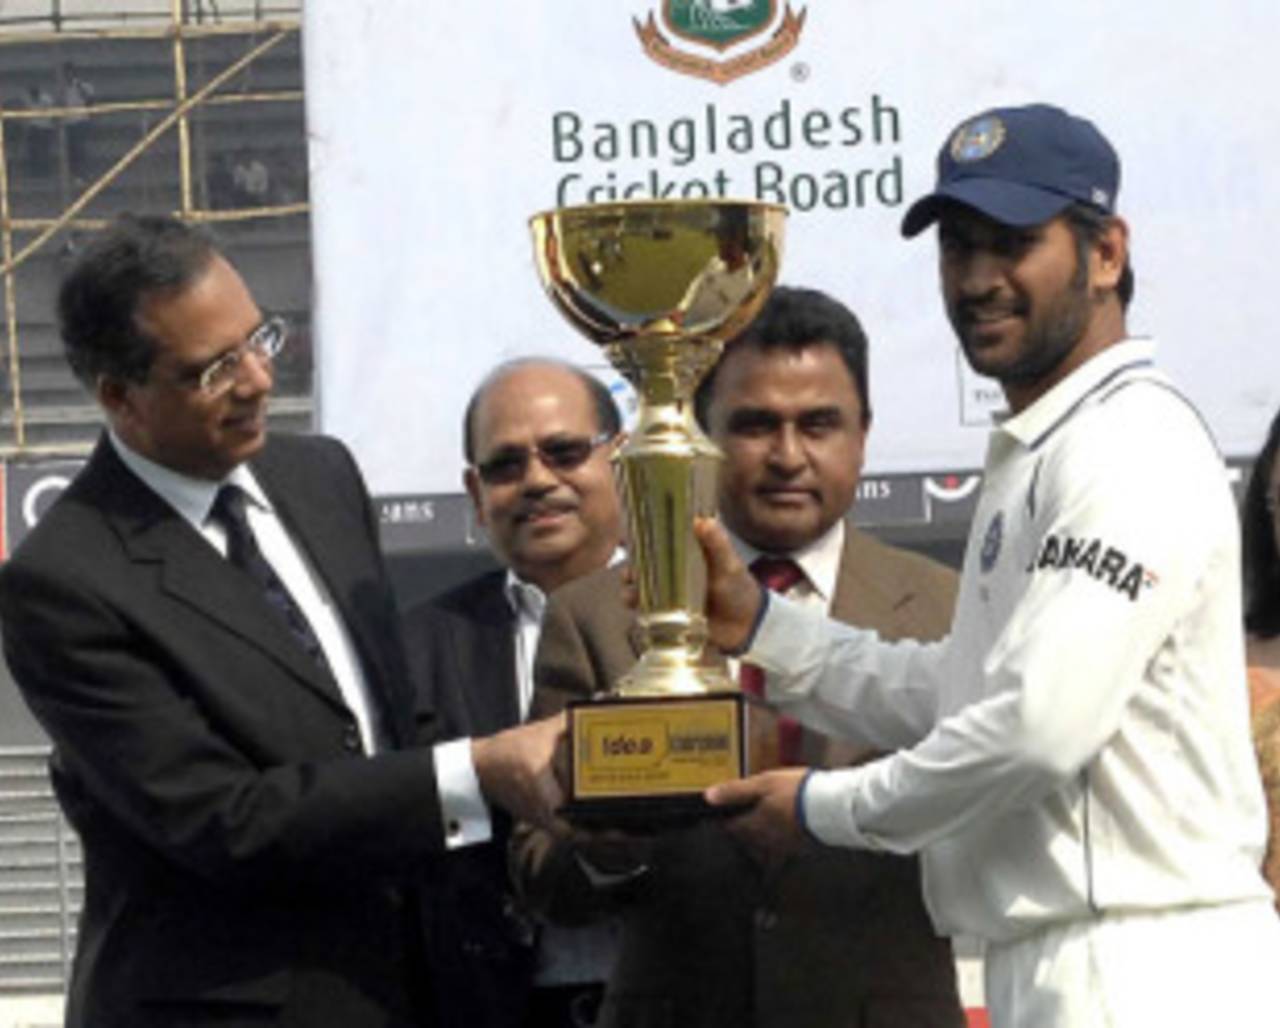 MS Dhoni receives the trophy after winning the series 2-0, Bangladesh v India, 2nd Test, Mirpur, 4th day, January 27, 2010